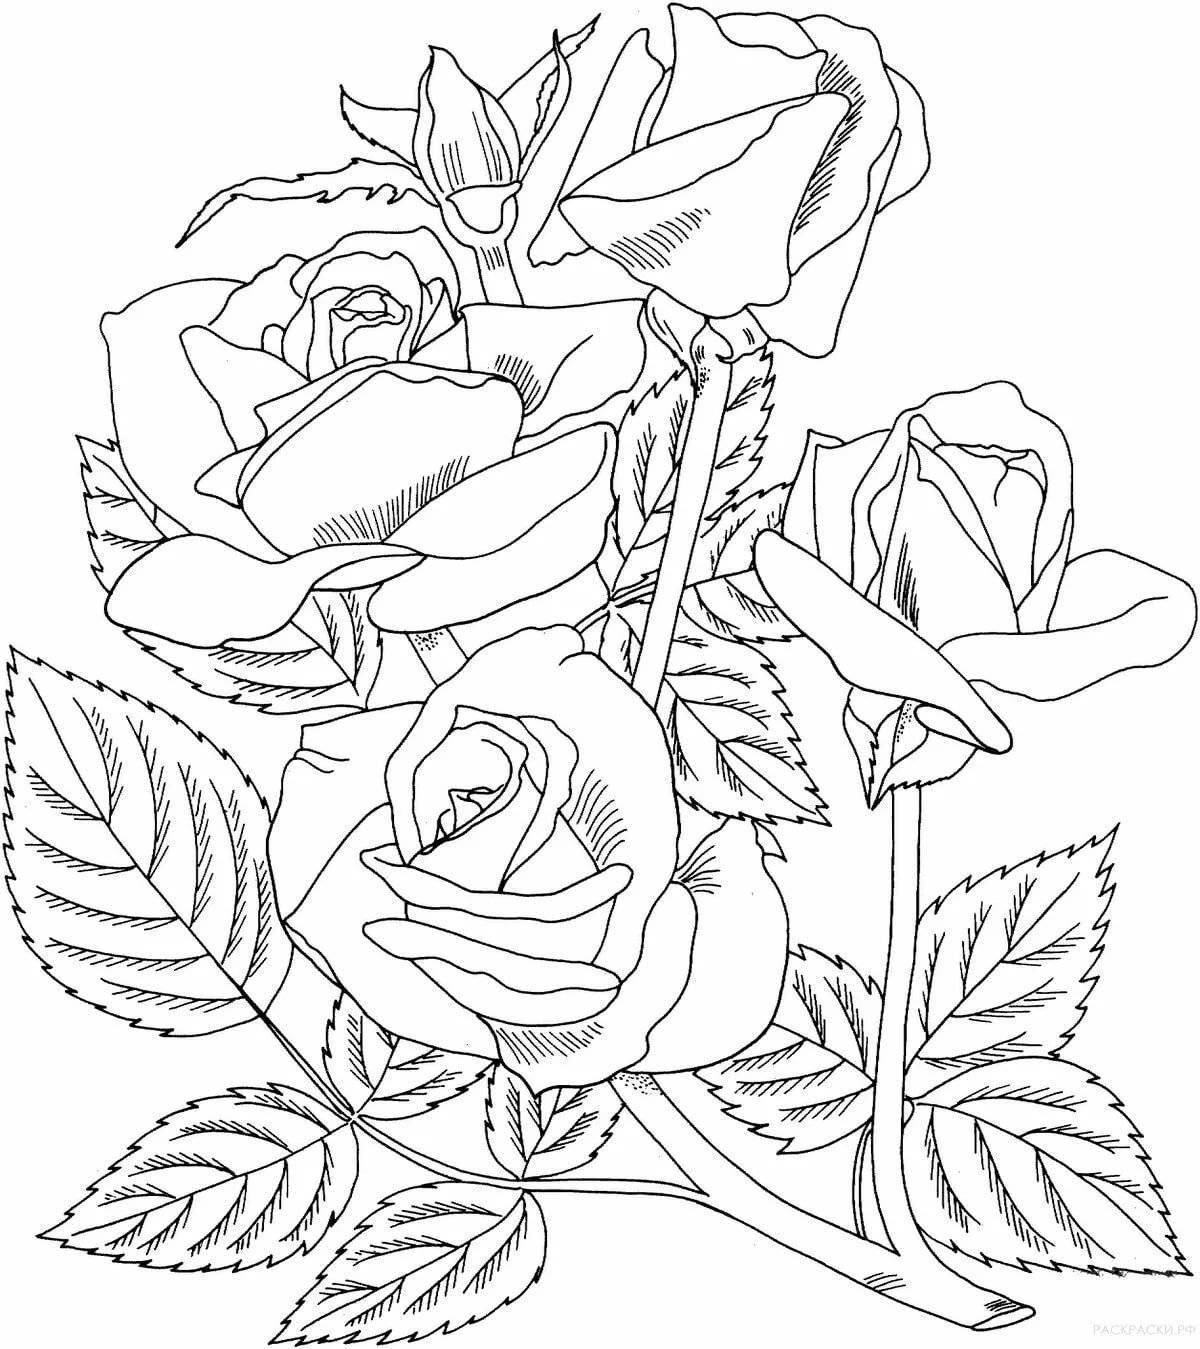 Color-bright coloring page for beginners